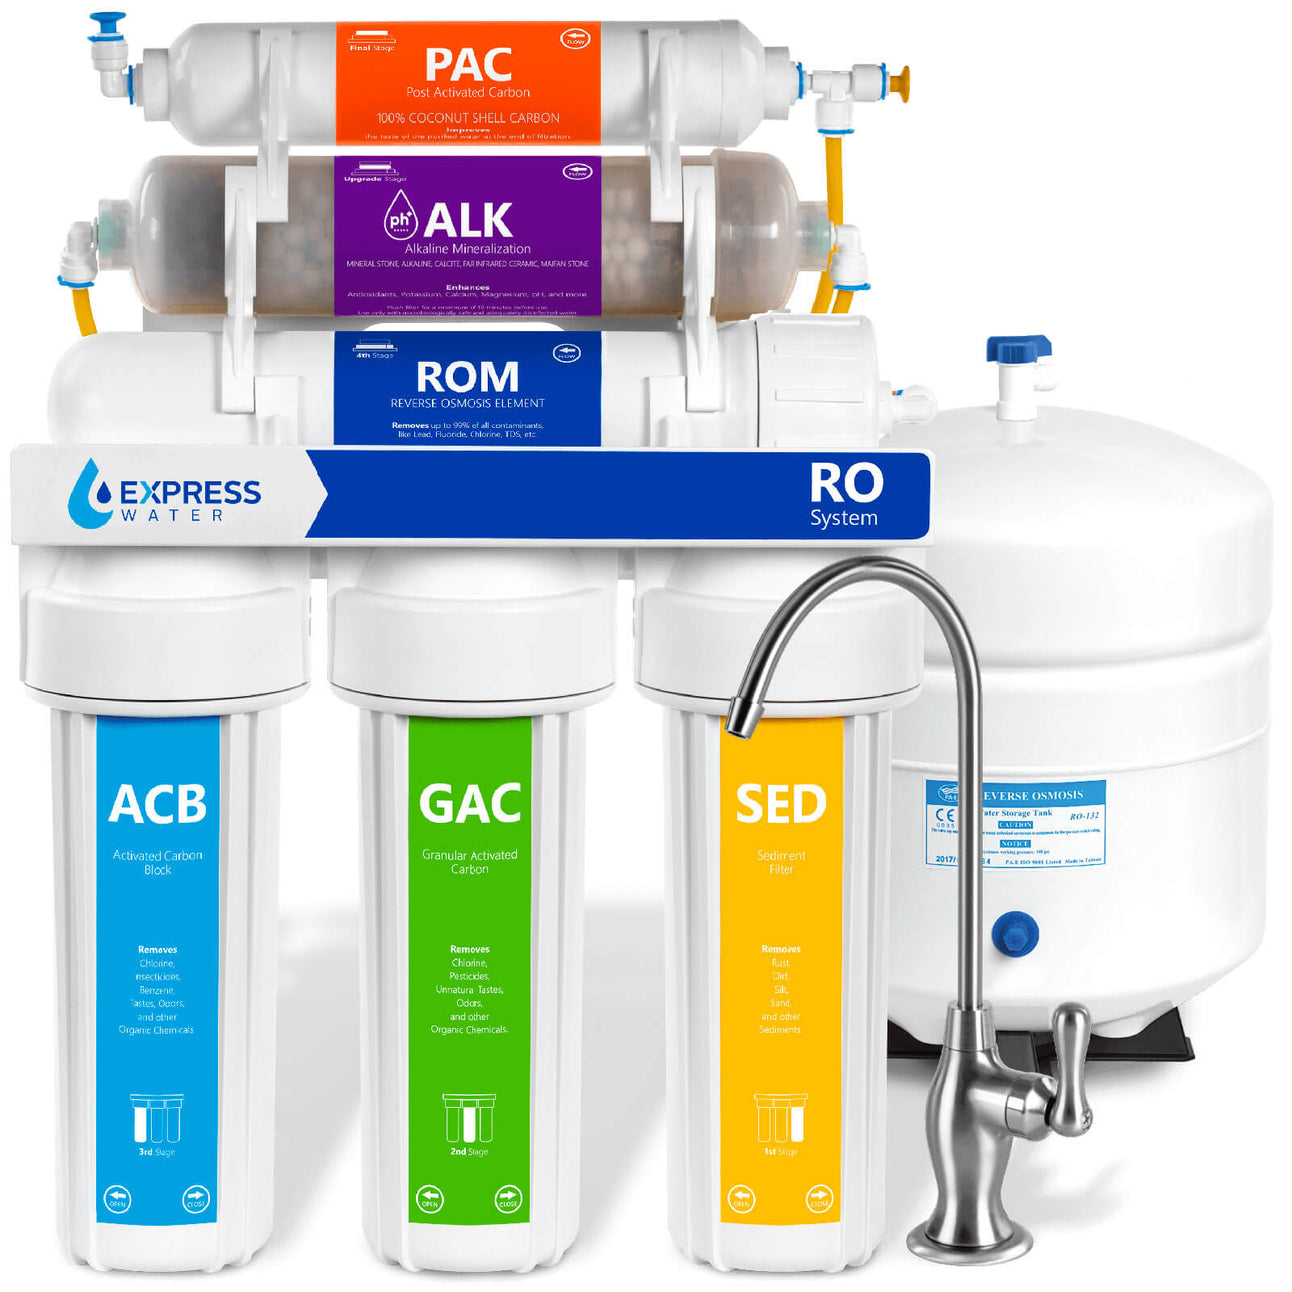 Alkaline RO System with deluxe chrome faucet